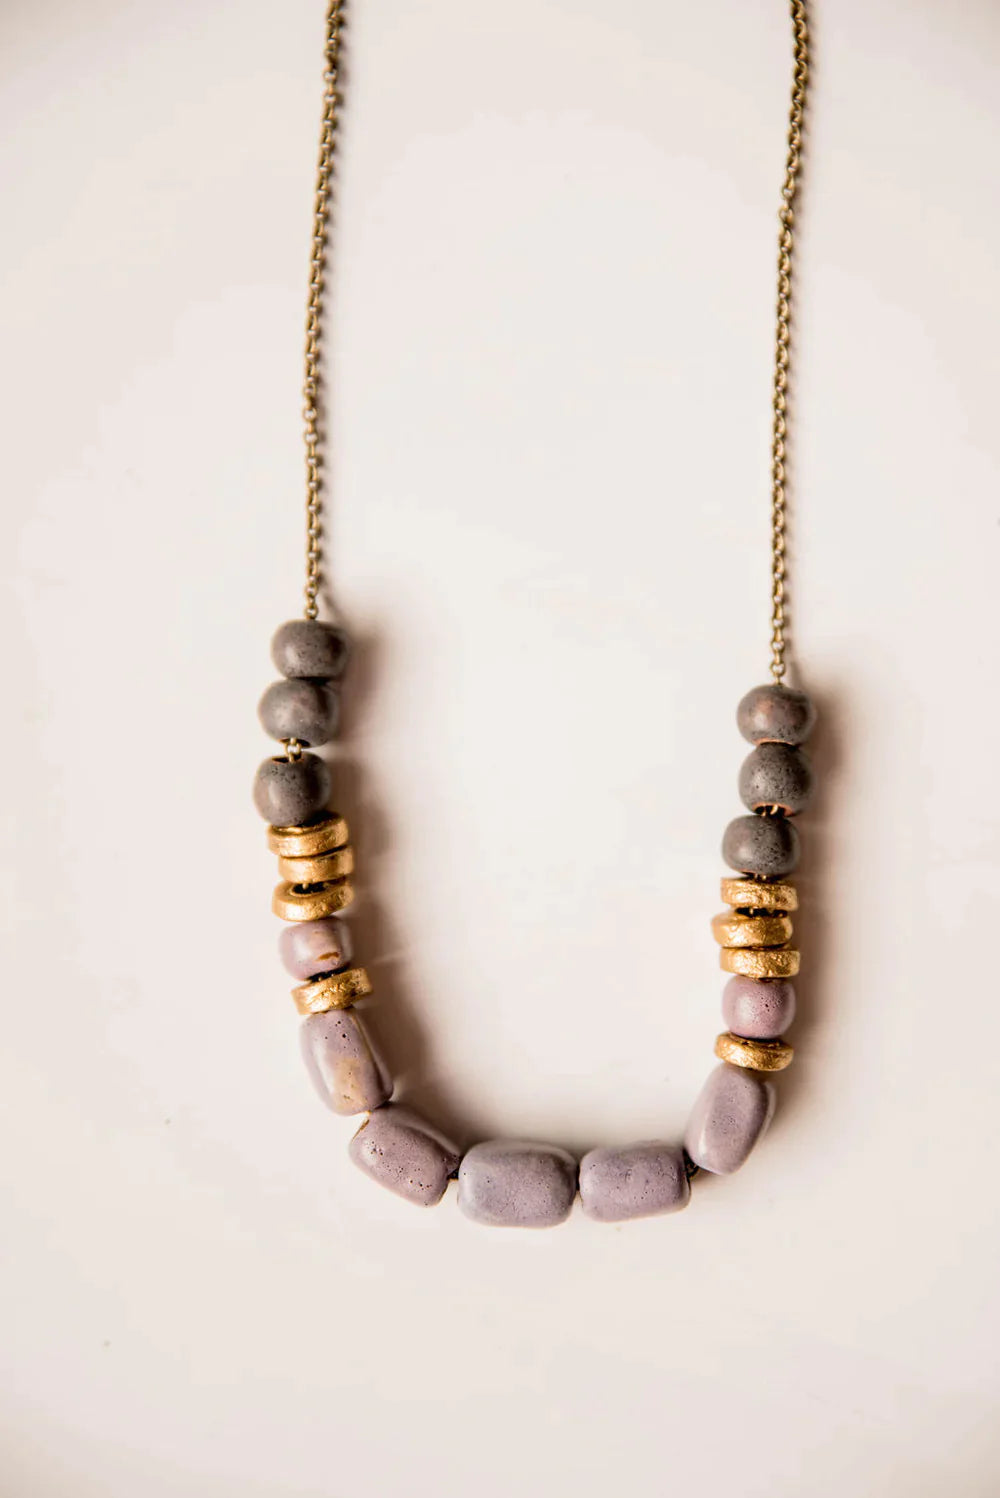 Bel Koz Assorted Beads Clay Necklace - LAVENDER - Link in description to purchase at Betsey's